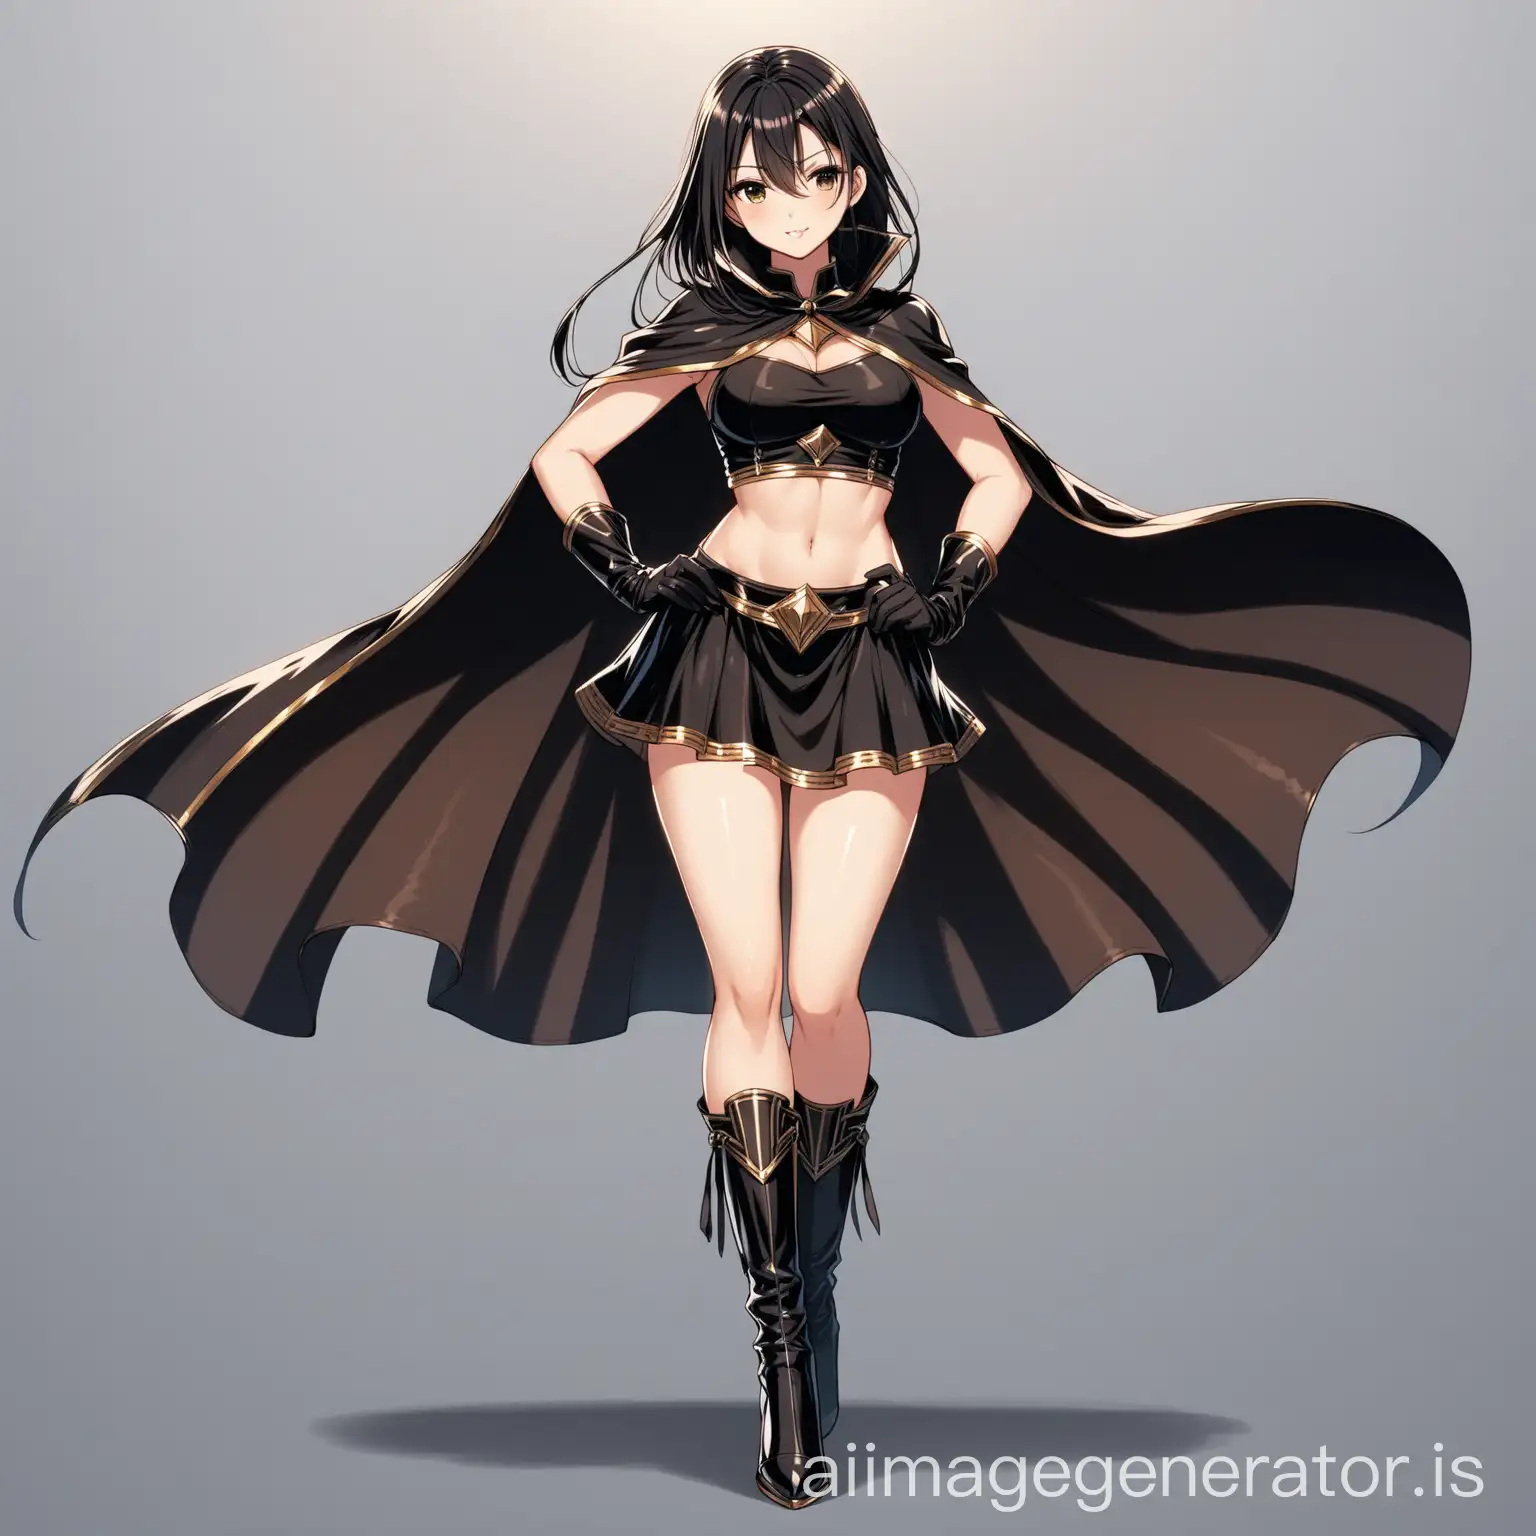 hot anime girl in an attractive black dress goddess costume wearing a croptop, skirt, long leather gloves, long leather boot heels and a cape